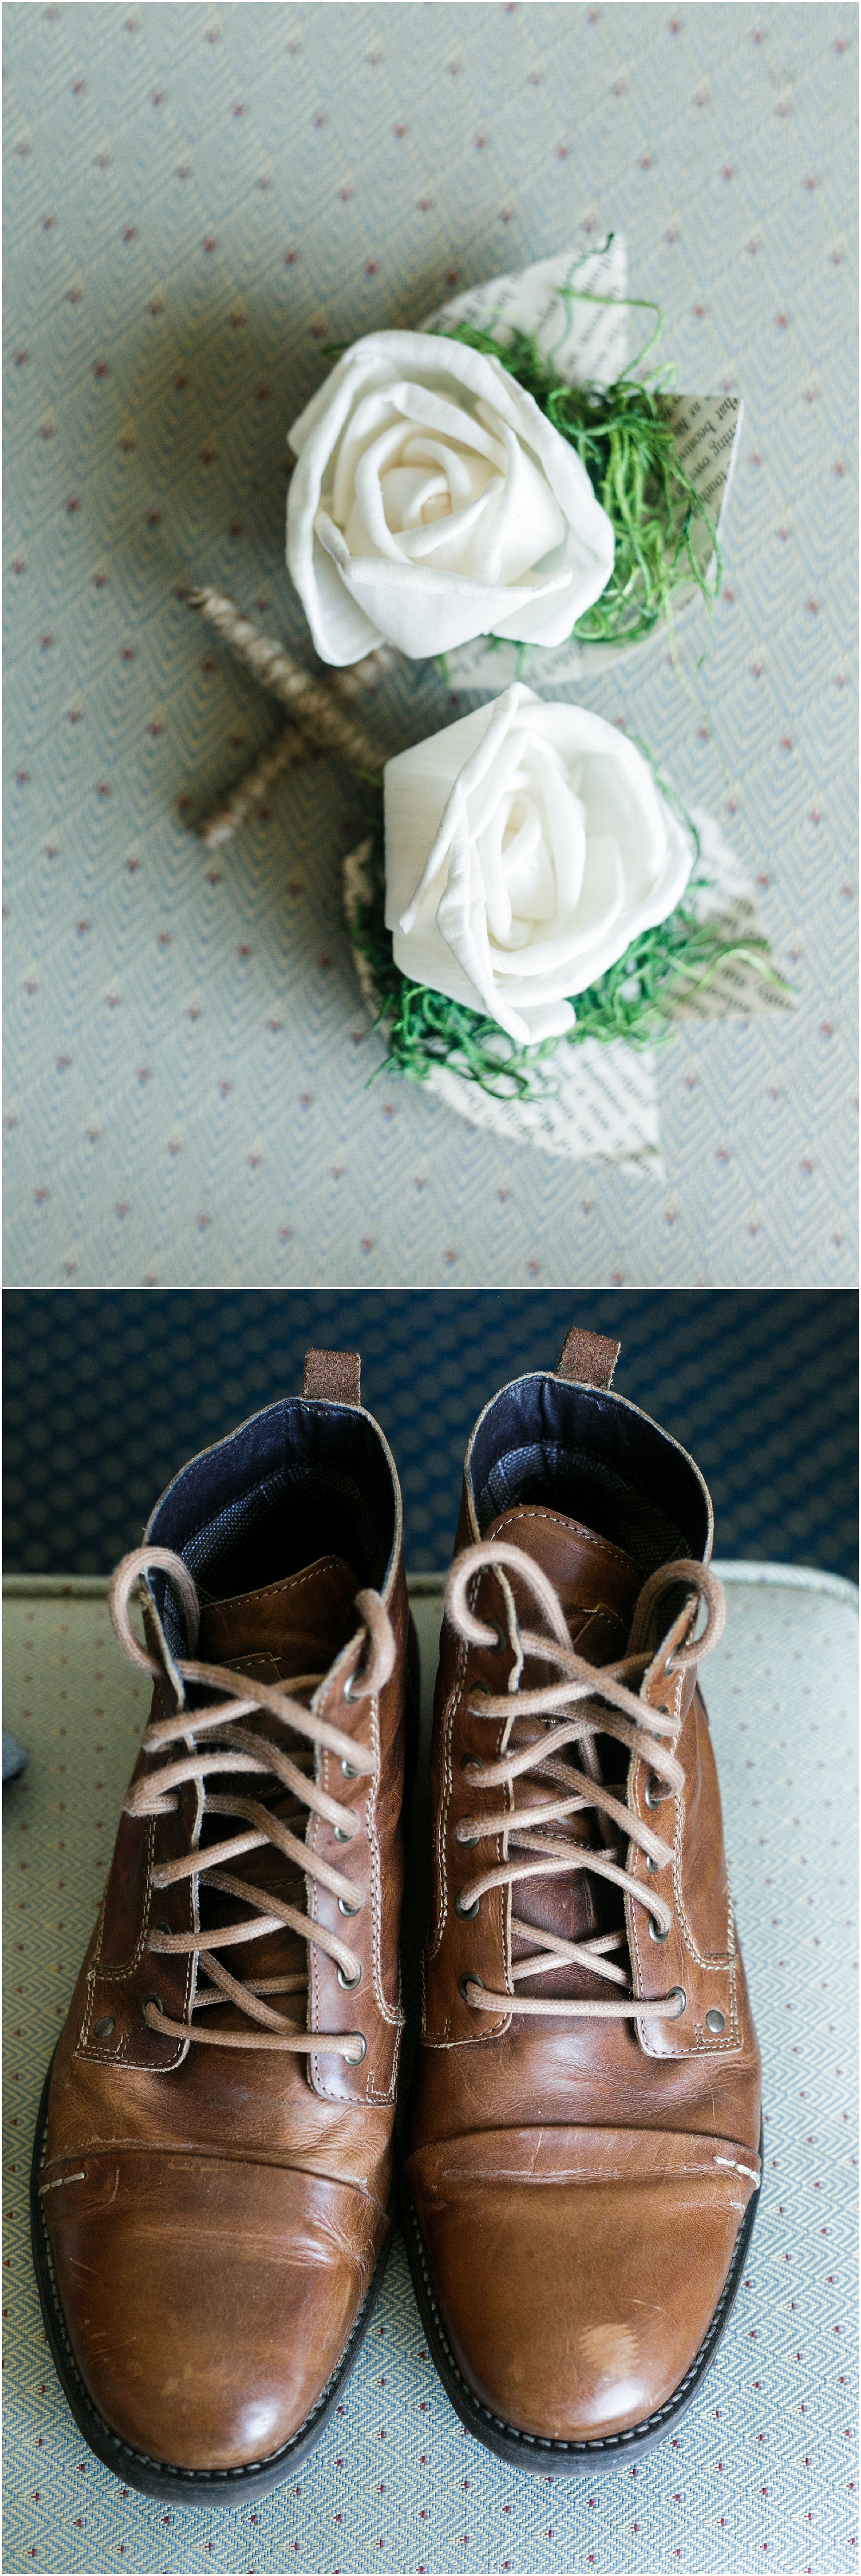 Grooms boutonnière and wedding shoes